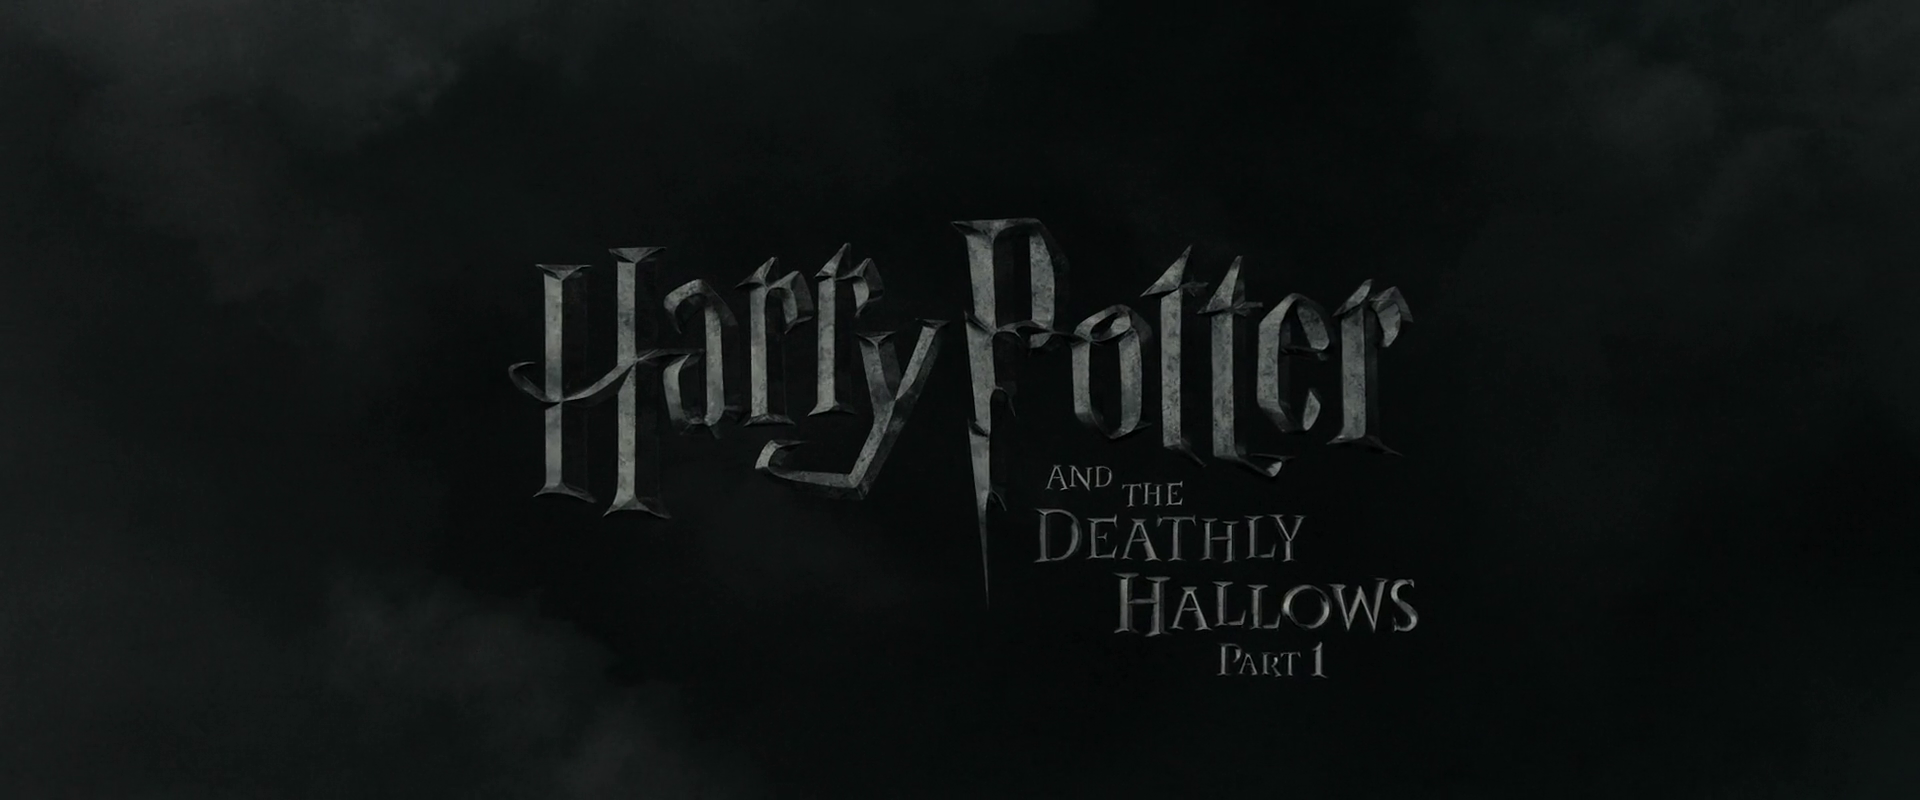 harry potter and the deathly hallows 1 online